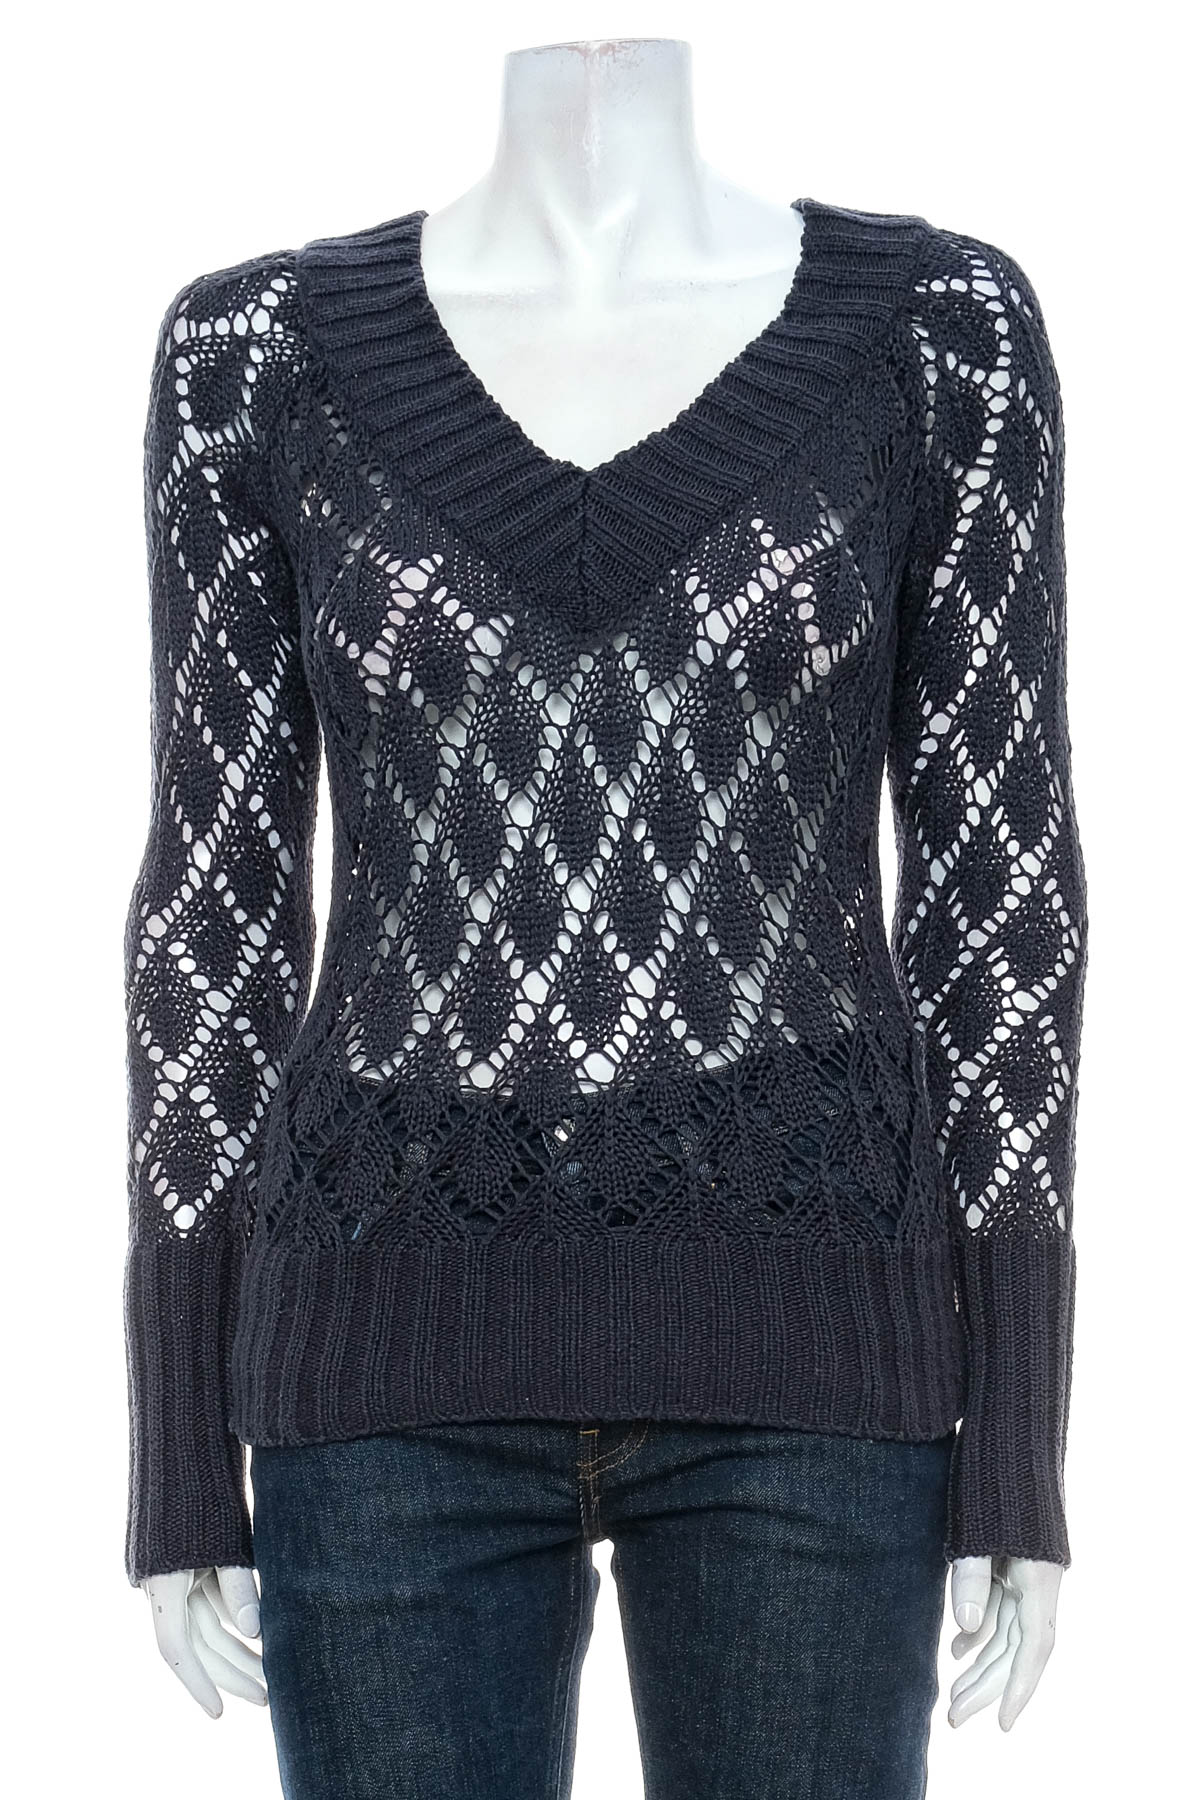 Women's sweater - QS by S.Oliver - 0